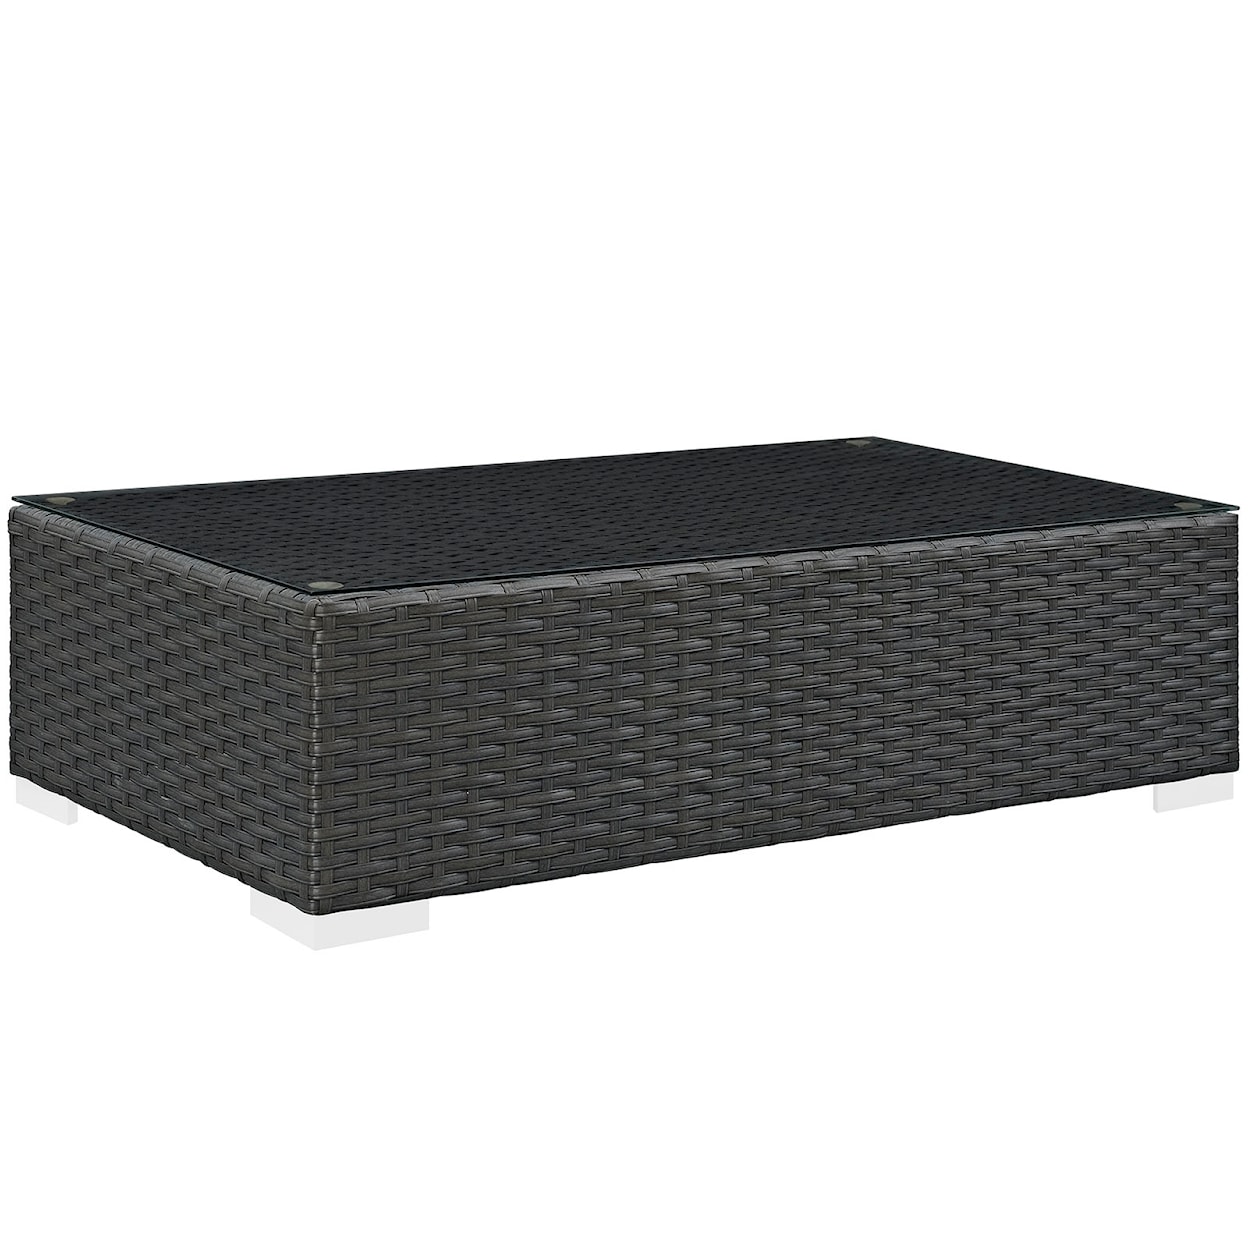 Modway Sojourn Outdoor Coffee Table